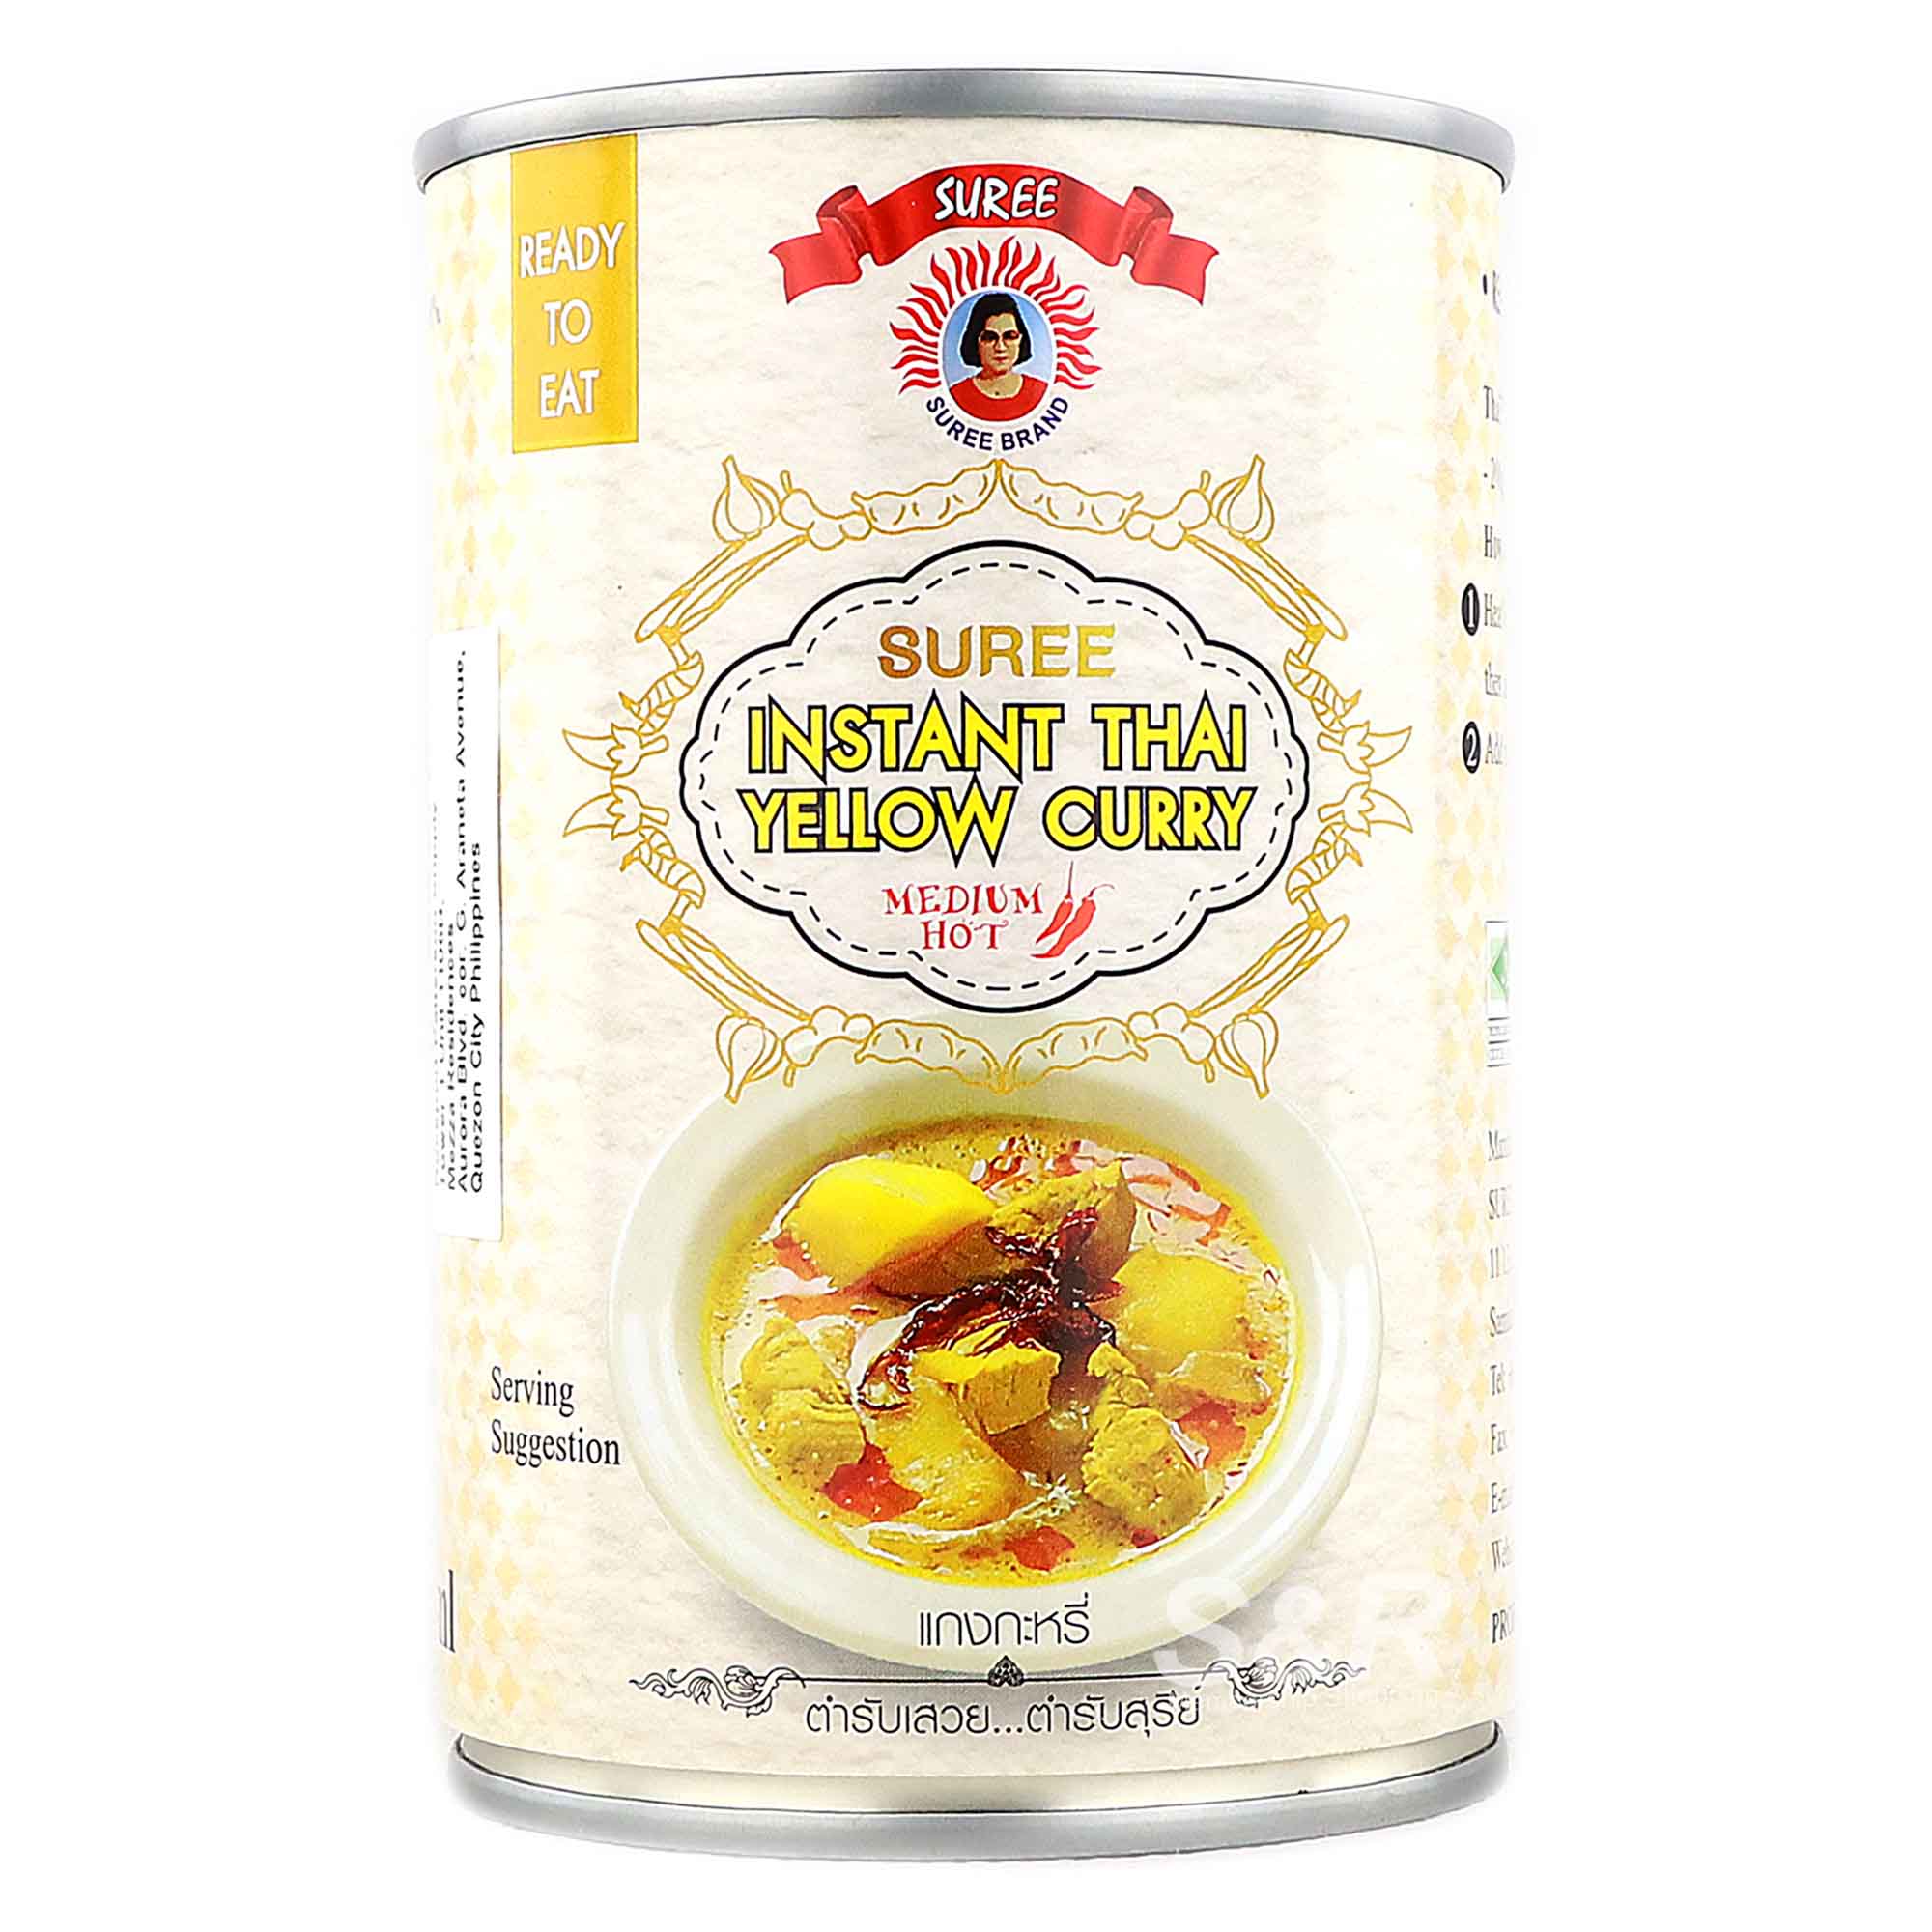 Suree Ready To Eat Instant Thai Yellow Curry Medium Hot 400mL